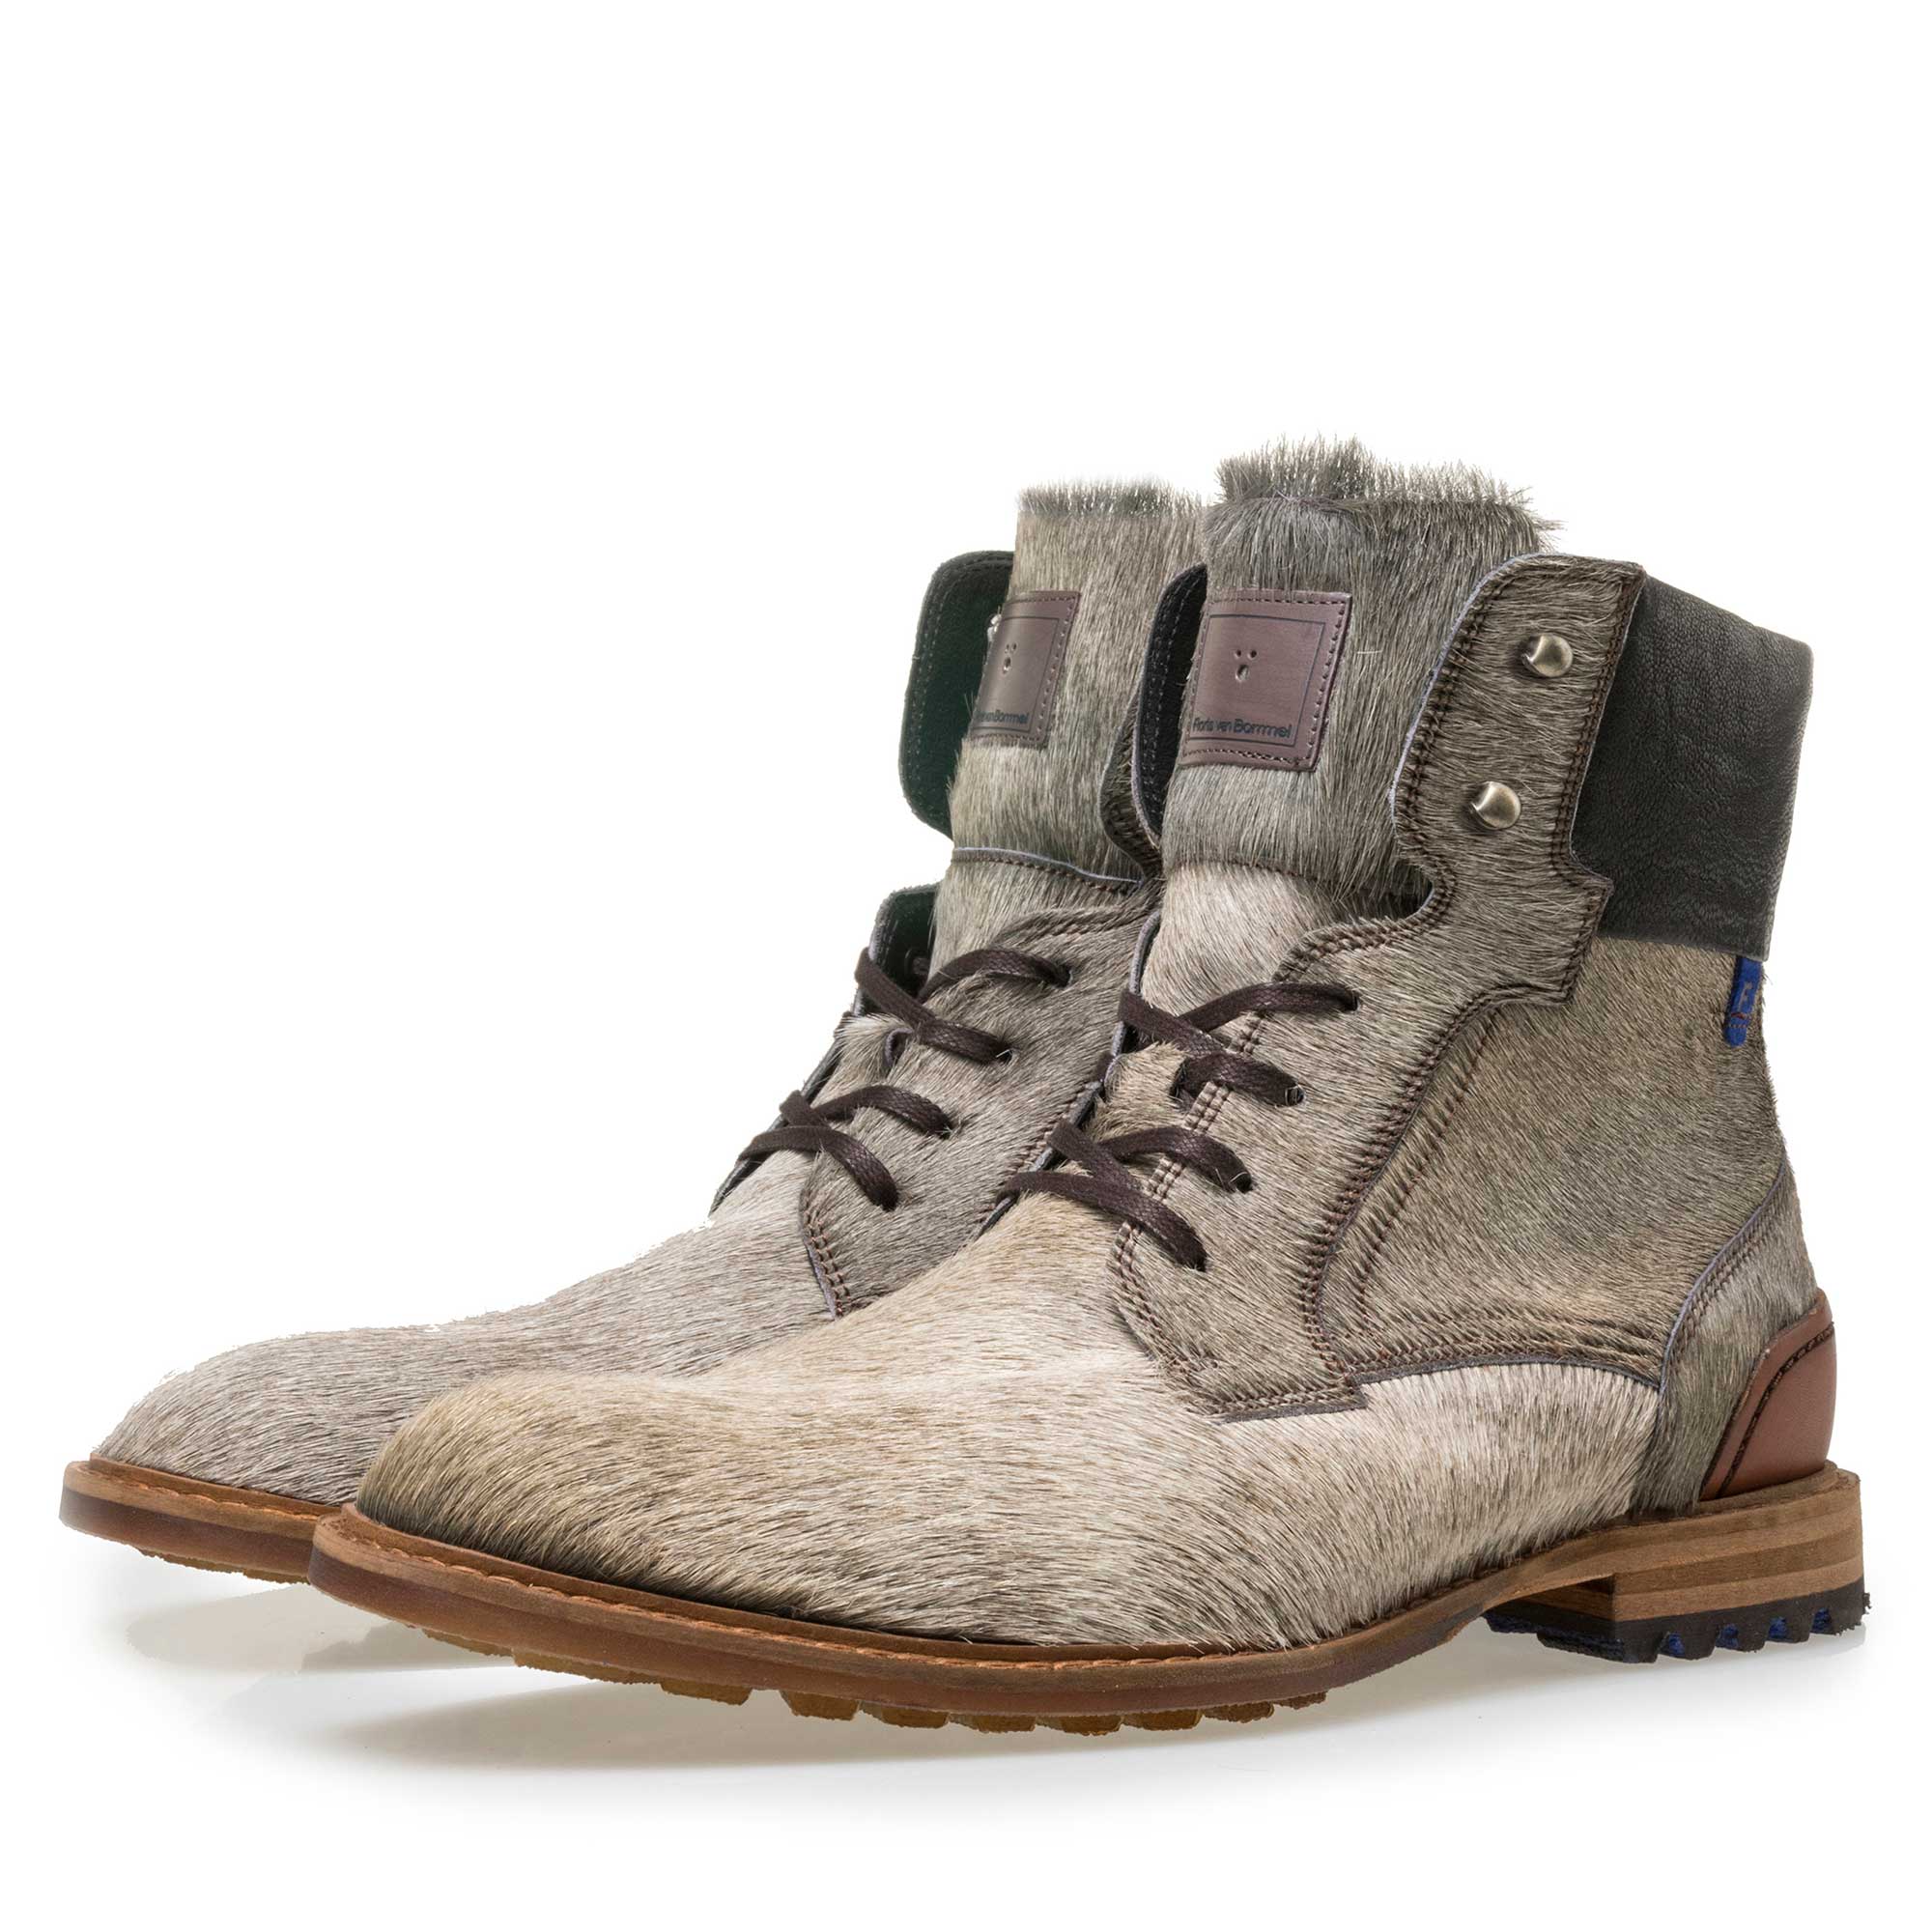 dief theorie Munching High sand-coloured pony hair lace boot 10913/08 Floris van Bommel